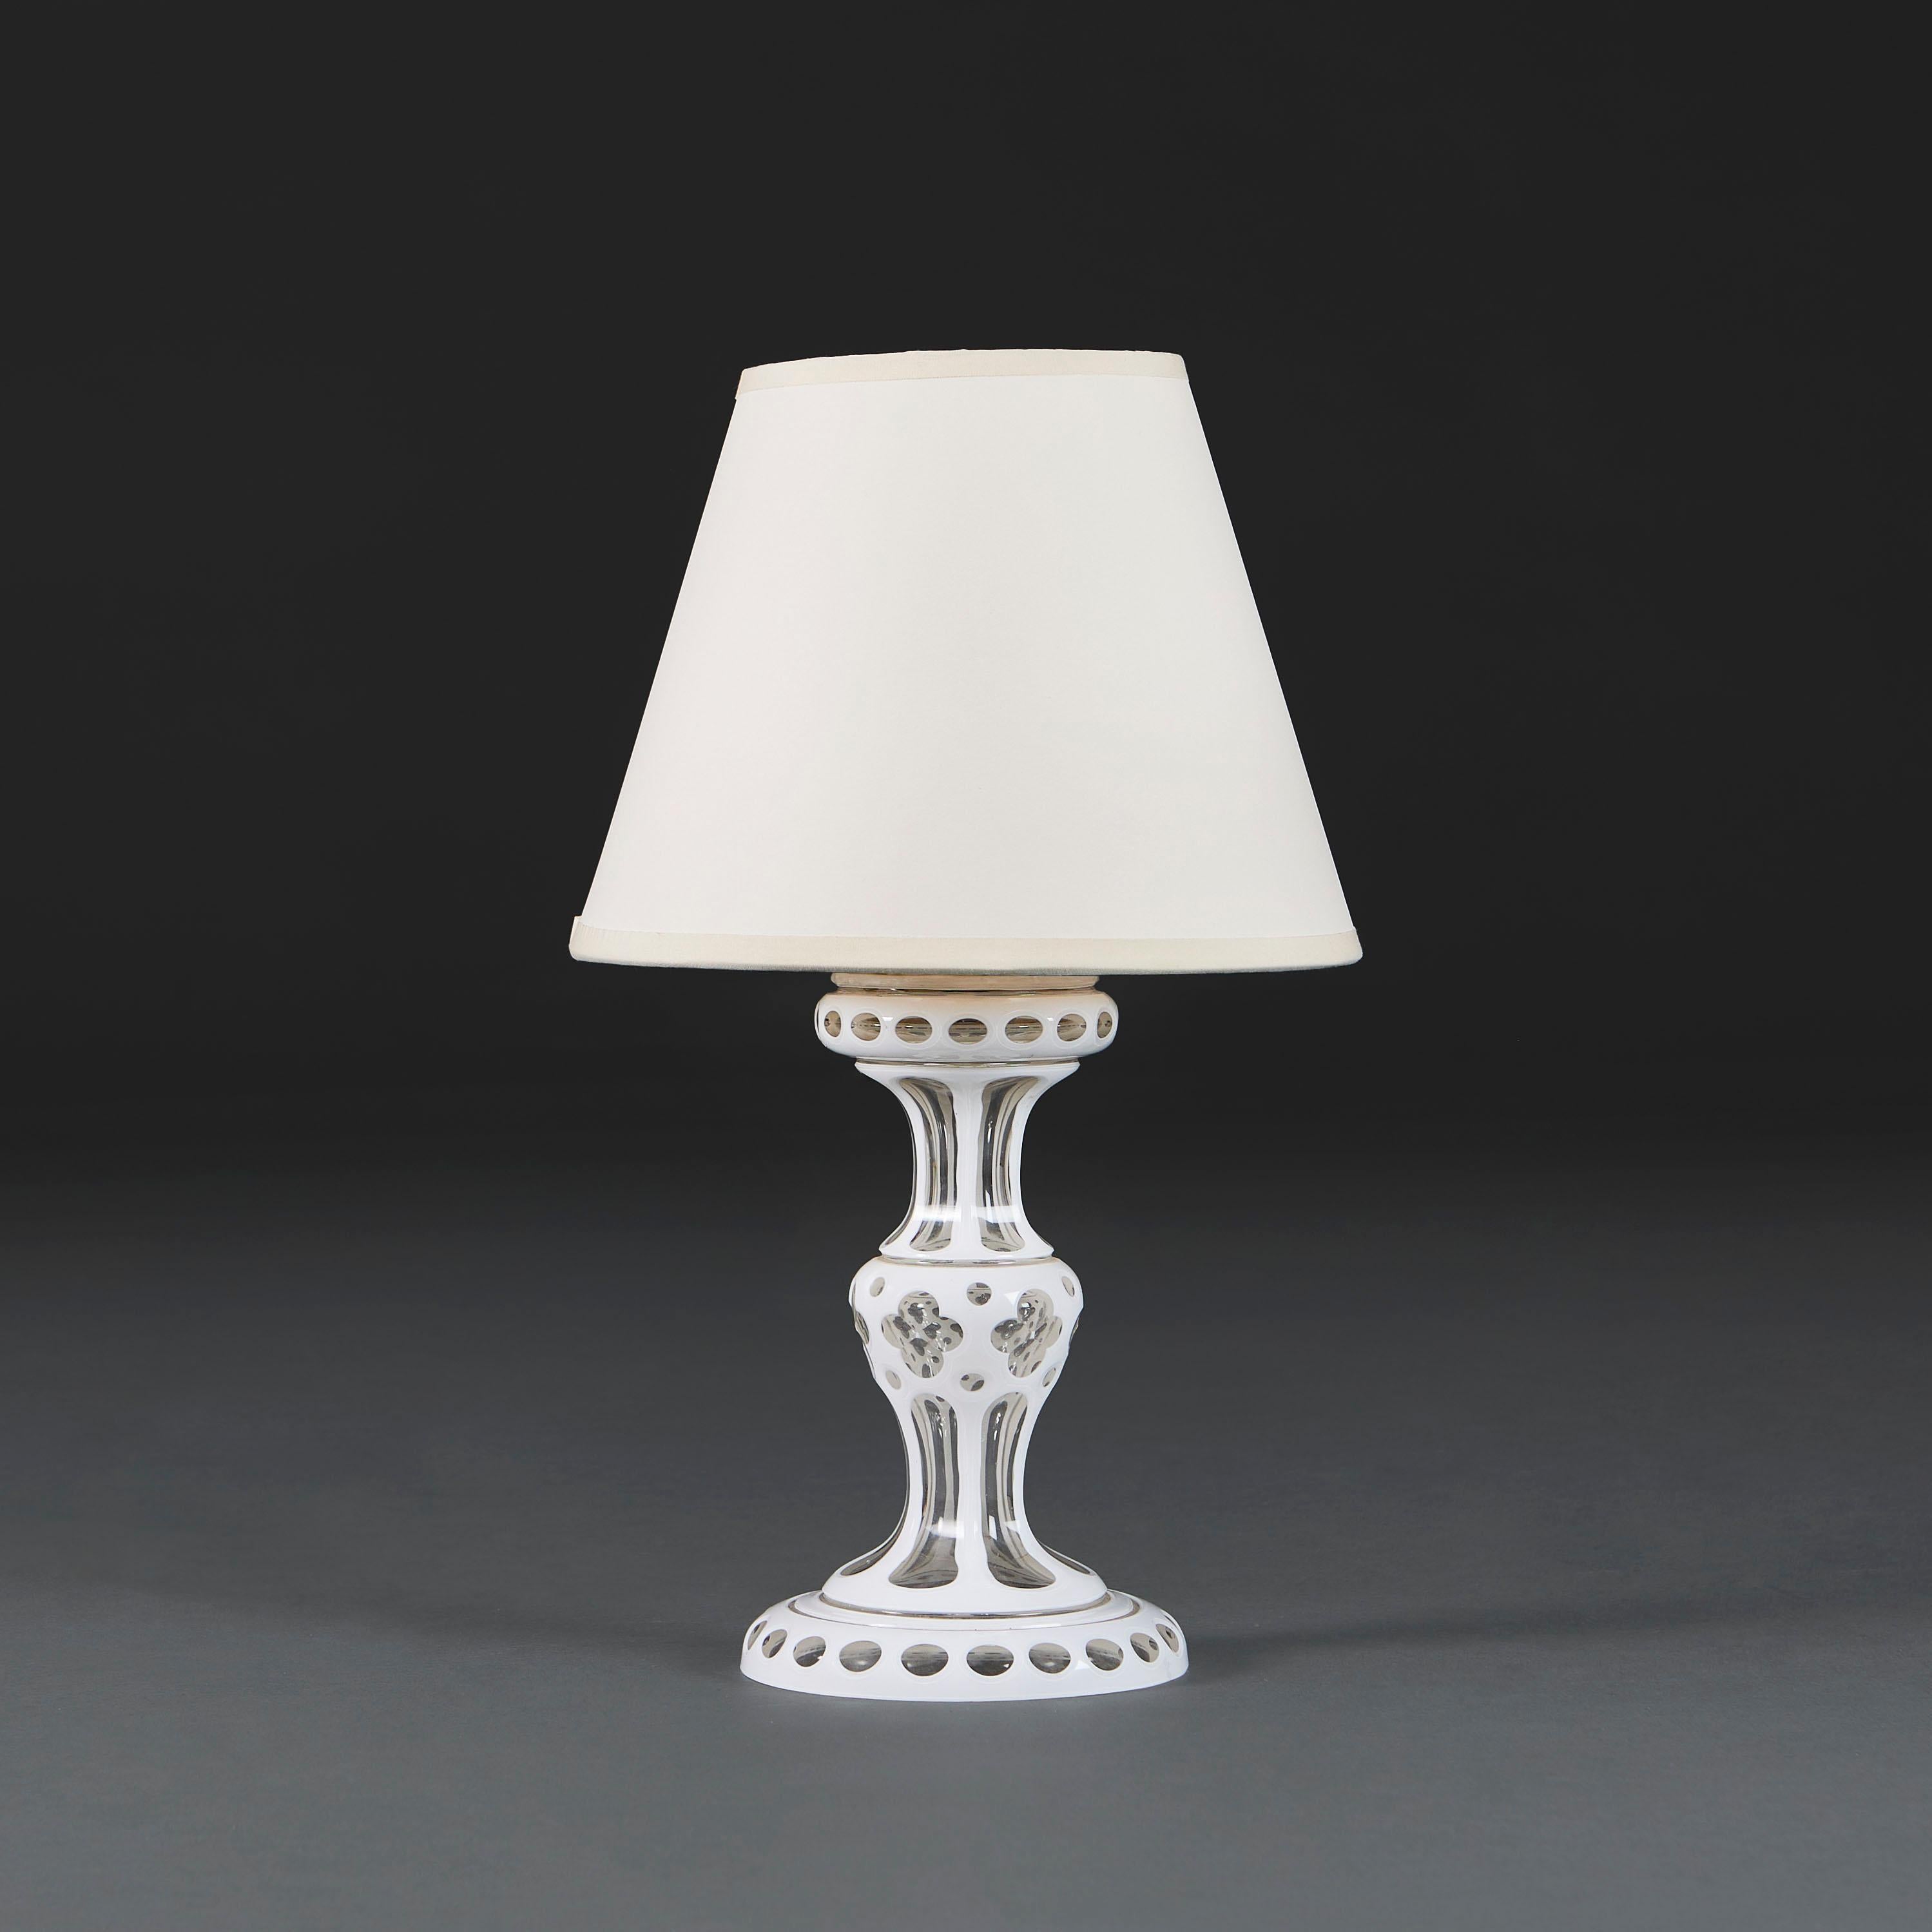 English, circa 1880

A mid 19th century white cut glass lamp of diablo form, decorated with quatrefoils to the central section.

Photographed with a 9” Pembroke lampshade in pale cream card.

Currently wired for the UK with BC bulb fitting, twisted